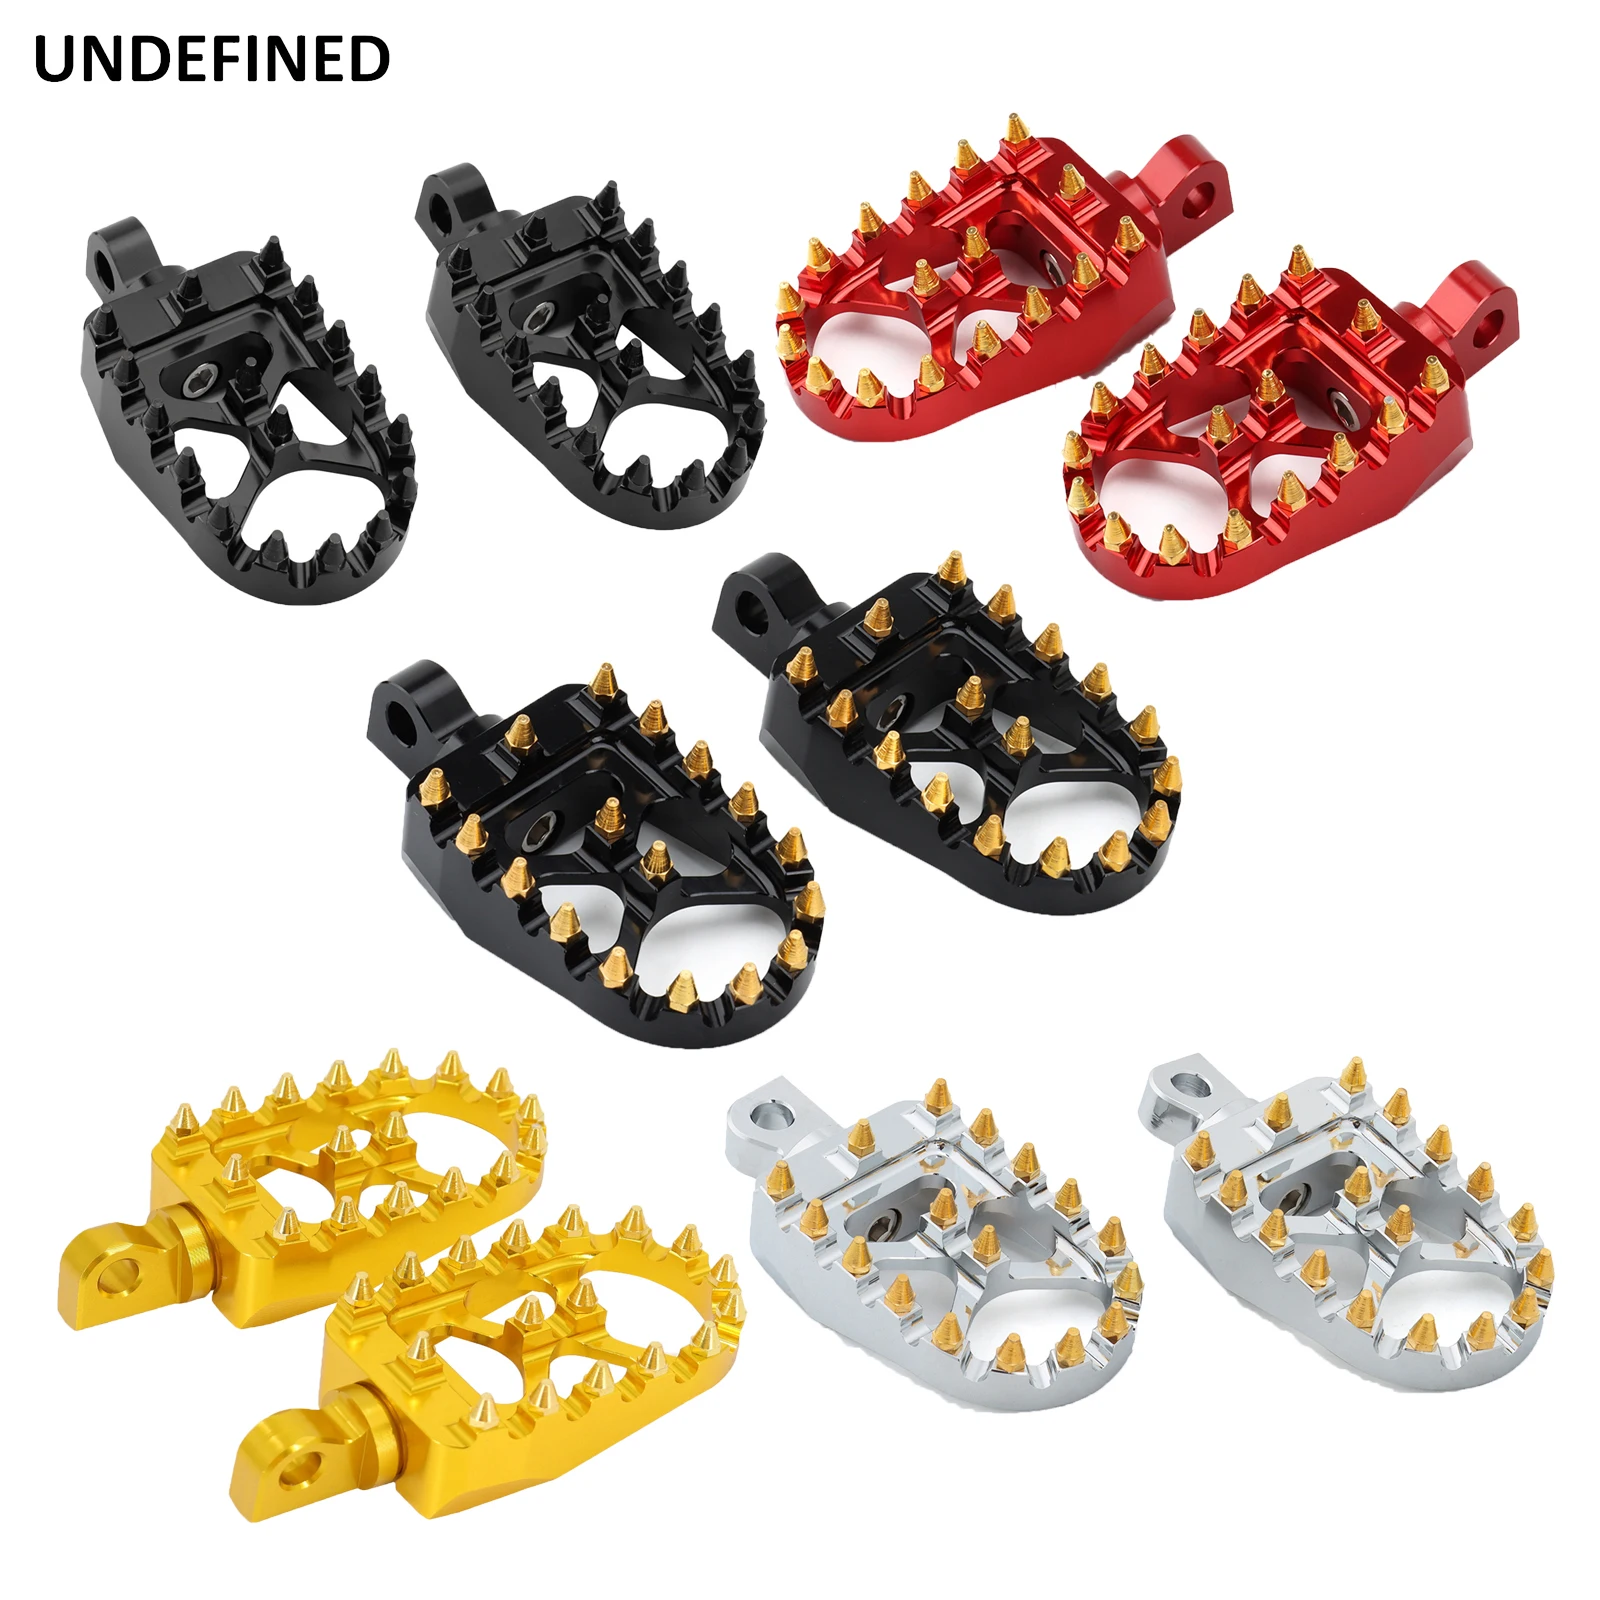 

MX Wide Fat Foot Pegs Motorcycle Offroad Footrests Pedals For Harley Dyna Fat Boy Street Bob Wide Glide Sportster Iron 883